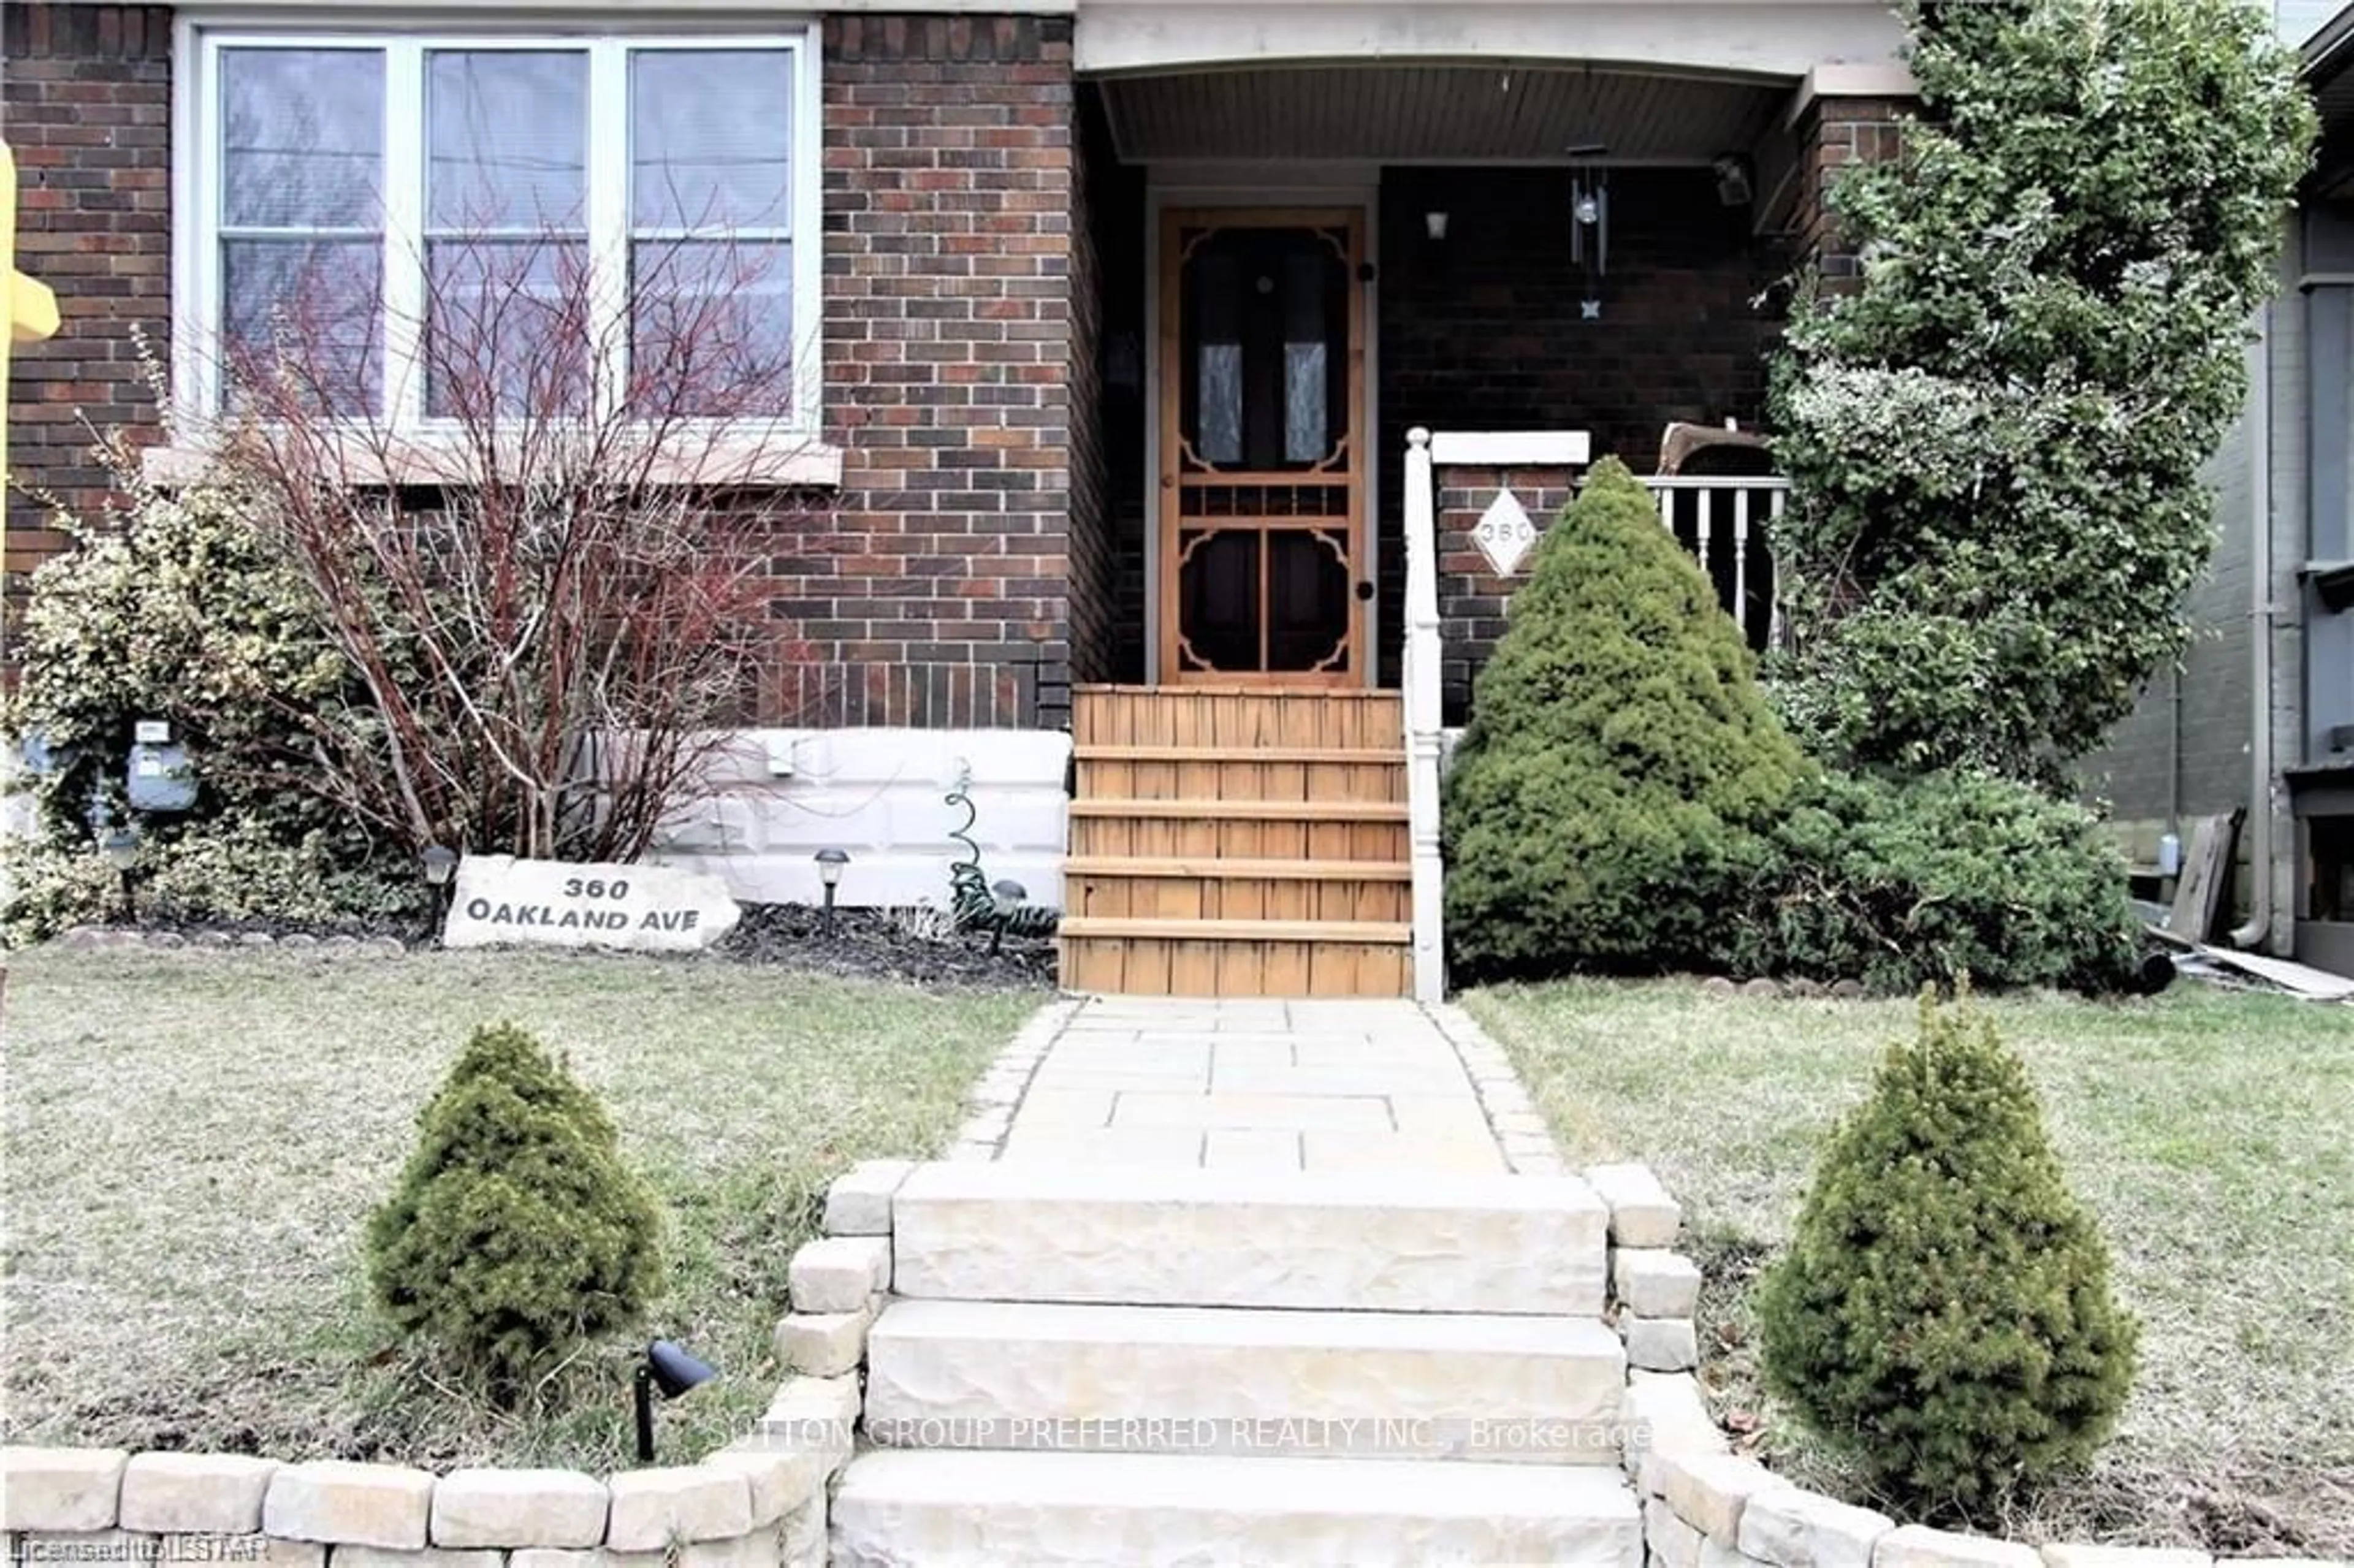 Home with brick exterior material for 360 Oakland Ave, London Ontario N5W 4J9